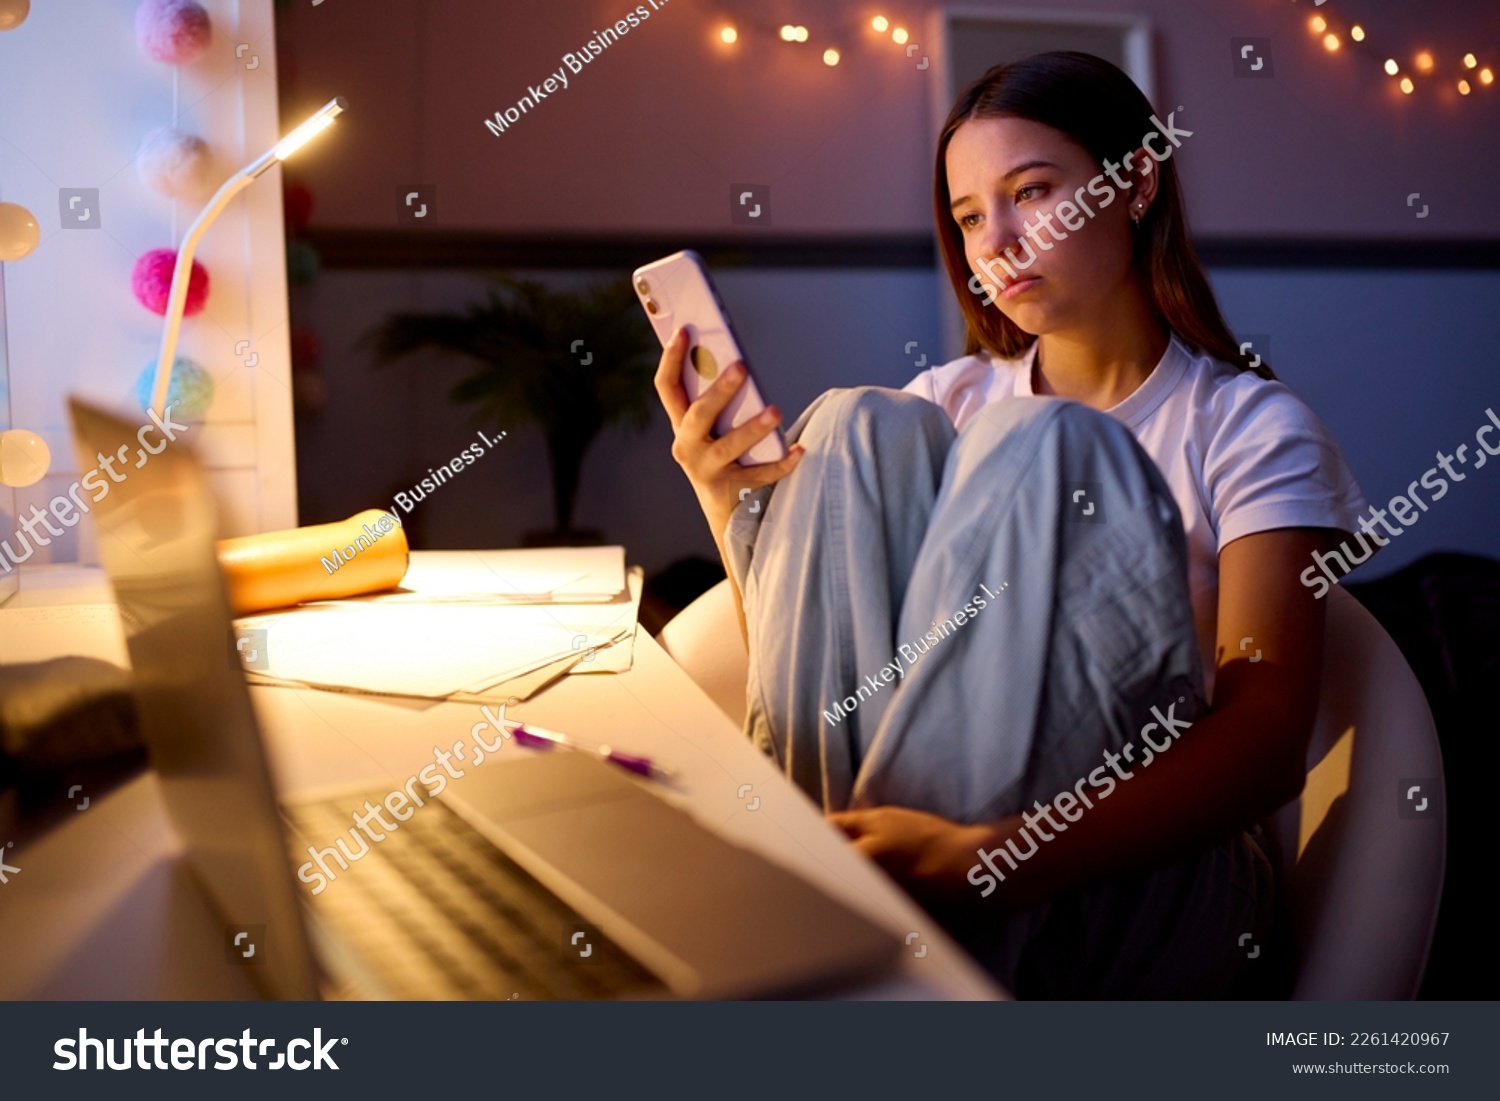 Worried Teenage Girl Sitting At Desk In Bedroom At Home Looking At Mobile Phone At Night #2261420967